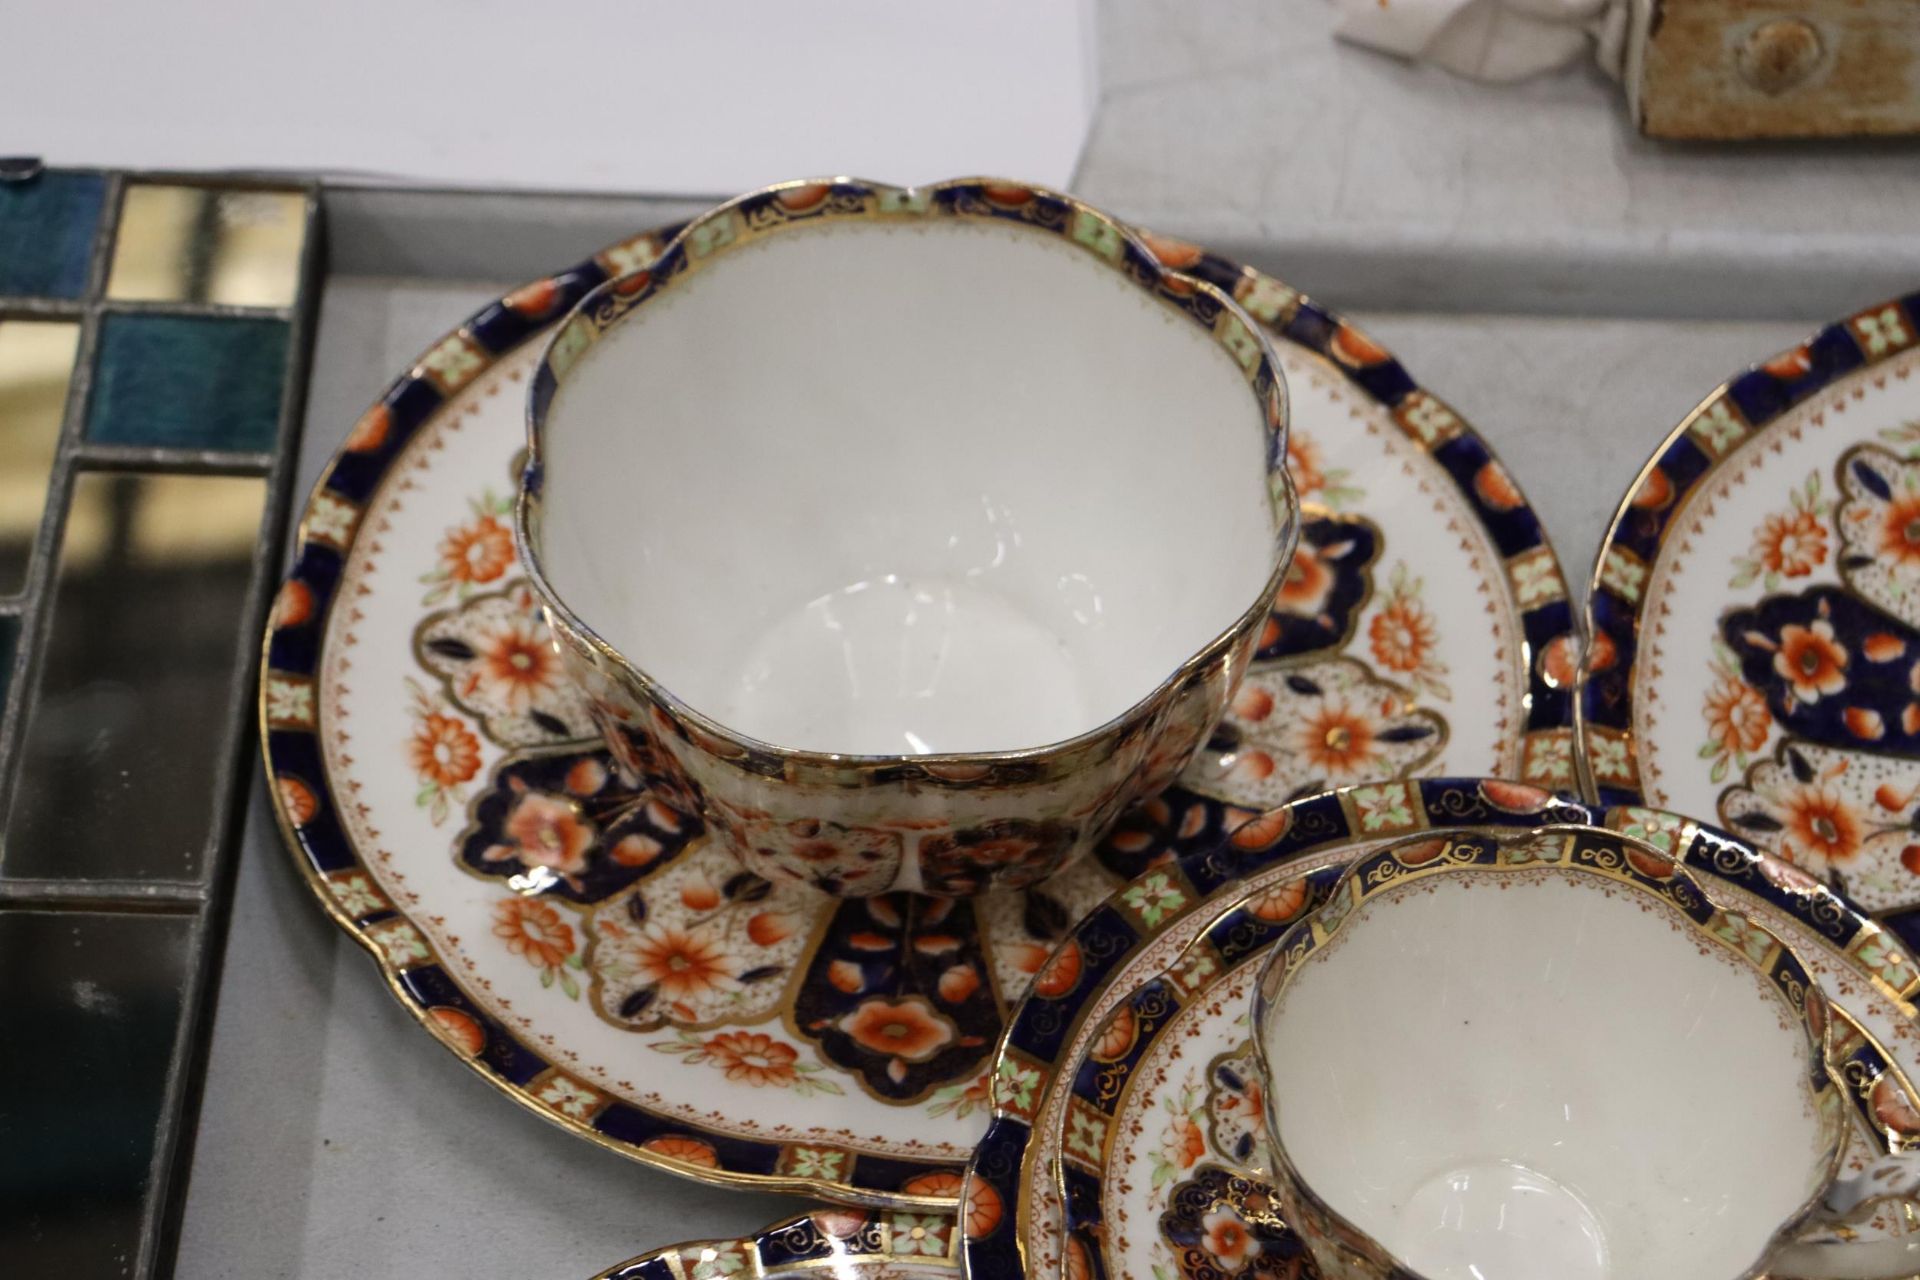 AN ANTIQUE 'COURT CHINA' TEASET TO INCLUDE CAKE PLATES, CUPS, SAUCERS, SIDE PLATES AND A SUGAR BOWL - Bild 7 aus 9